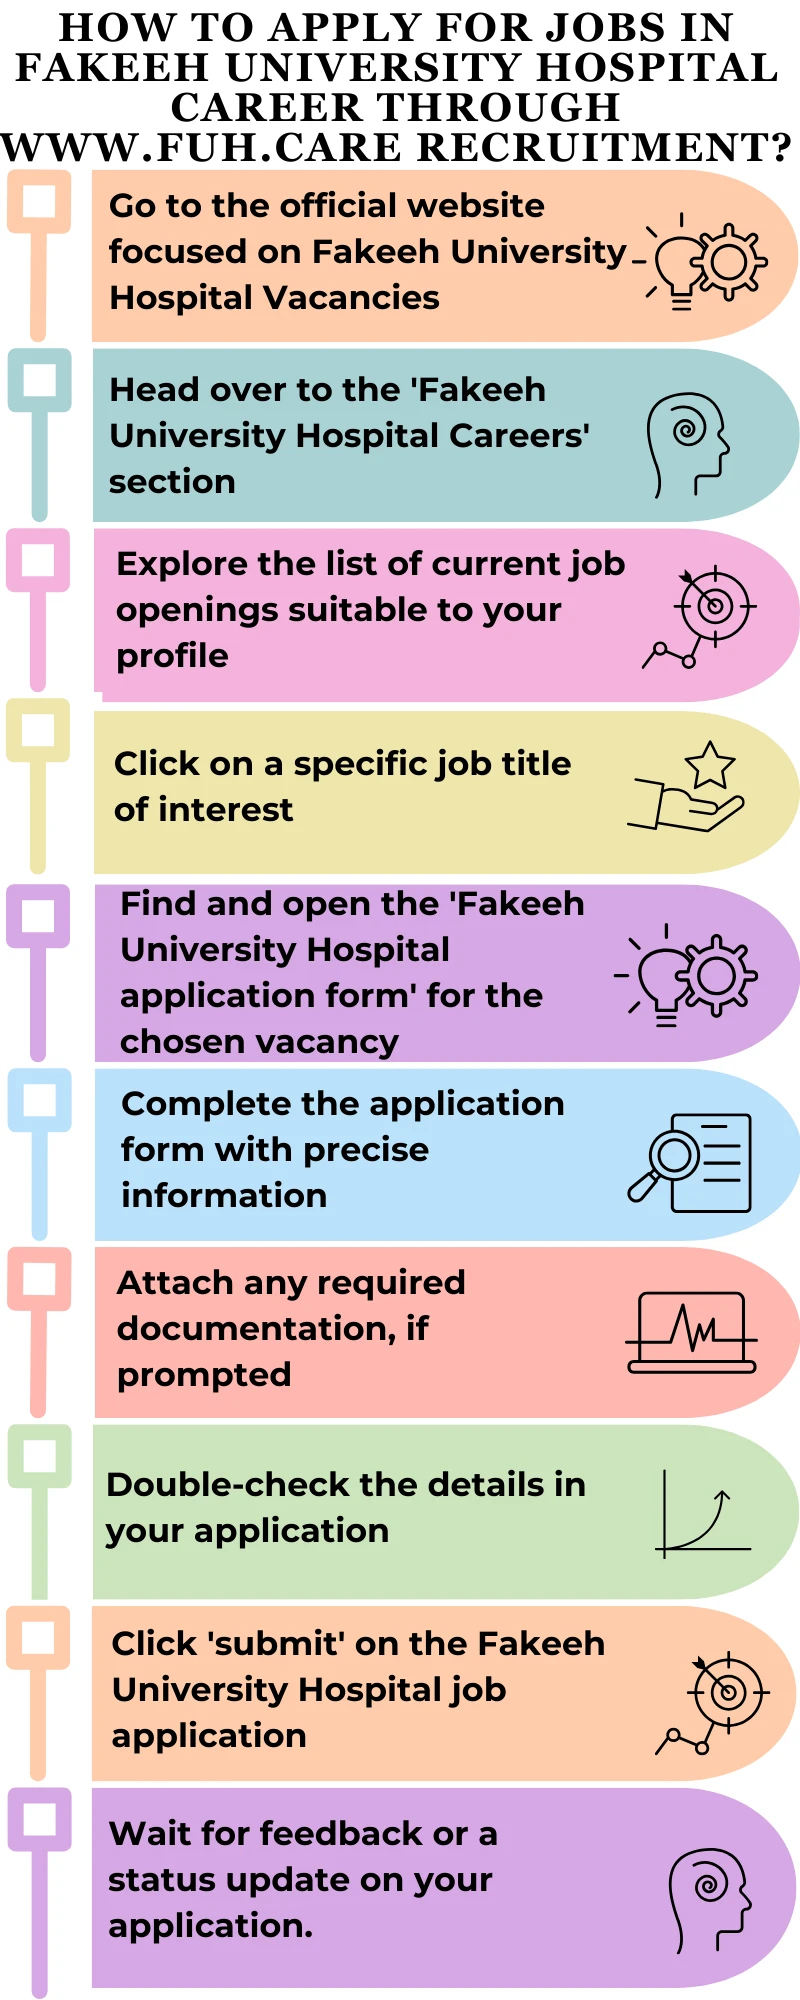 How to Apply for Jobs in Fakeeh University Hospital Career through www.fuh.care recruitment?